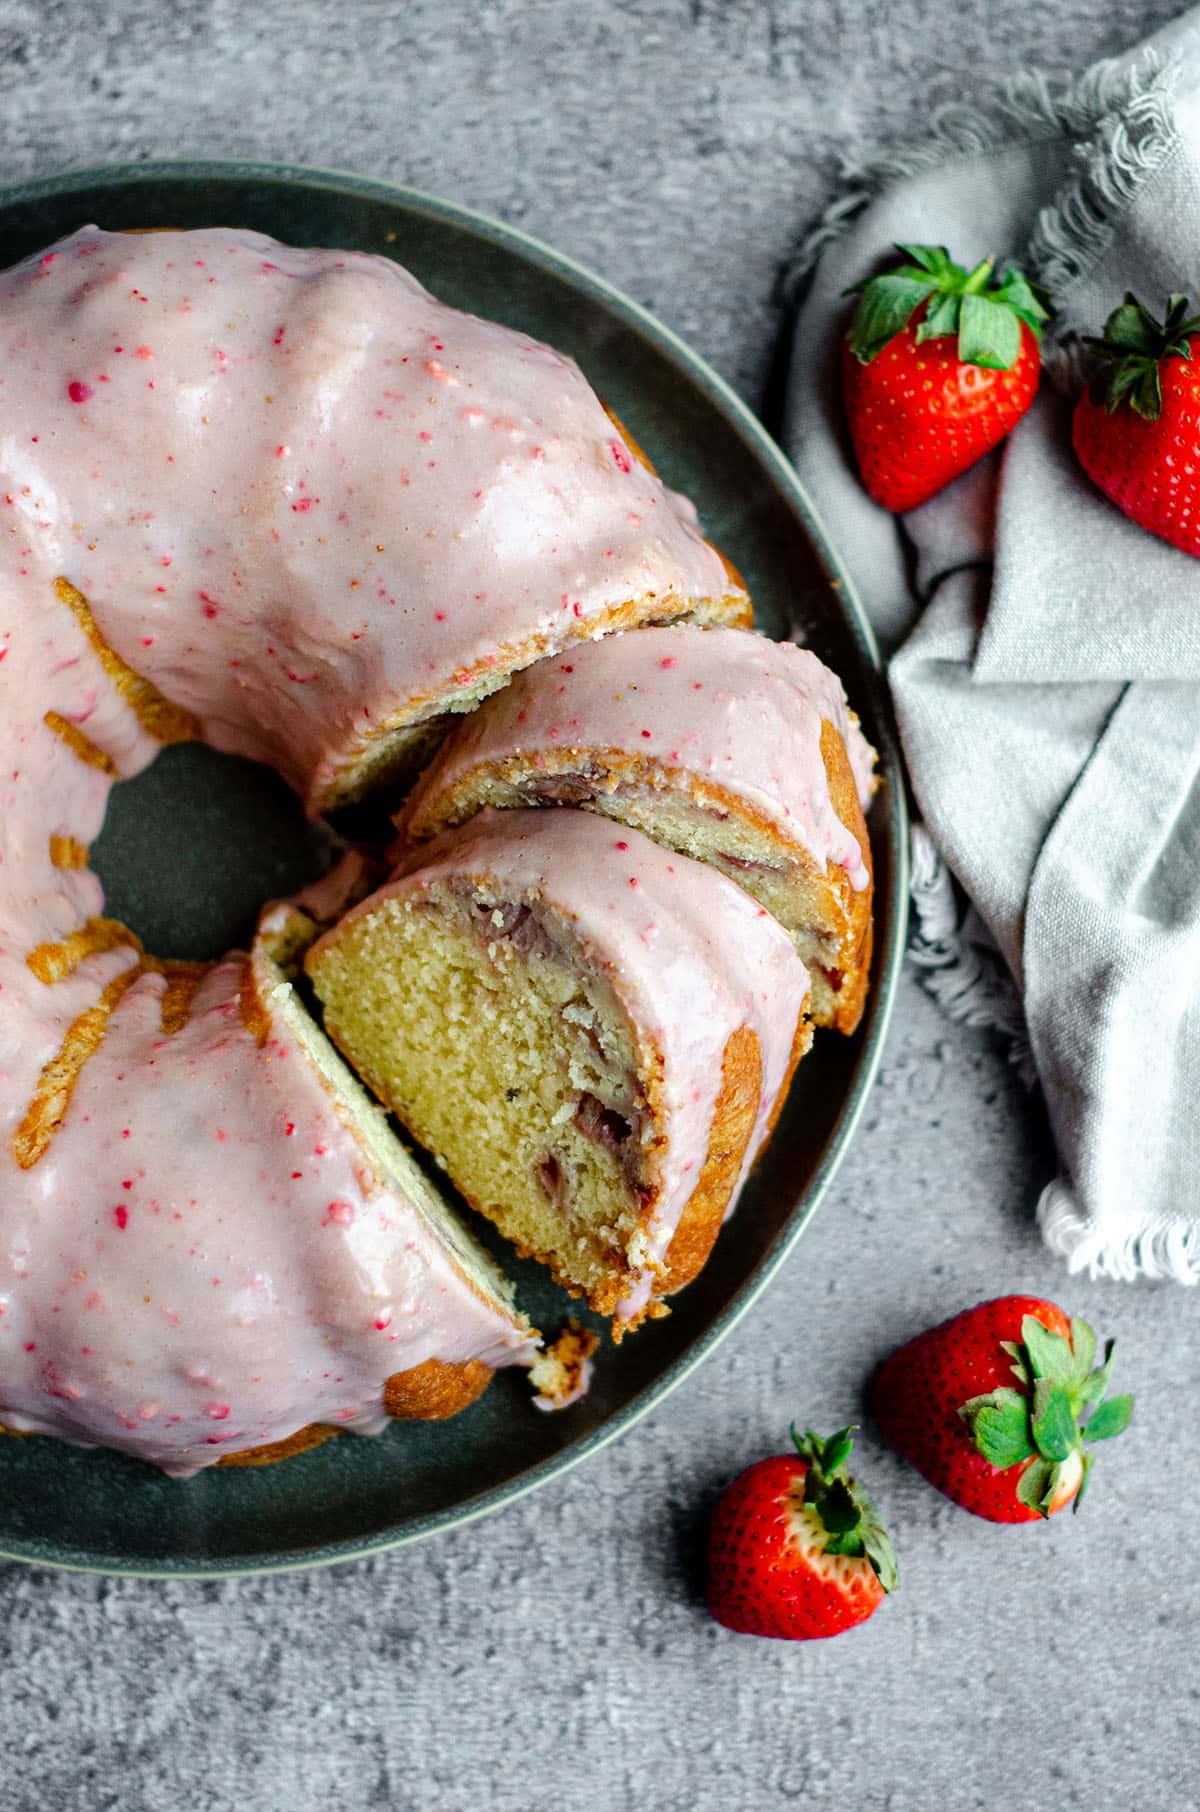 aerial photo of a strawberry bundt cake on a plate with some slices made into it